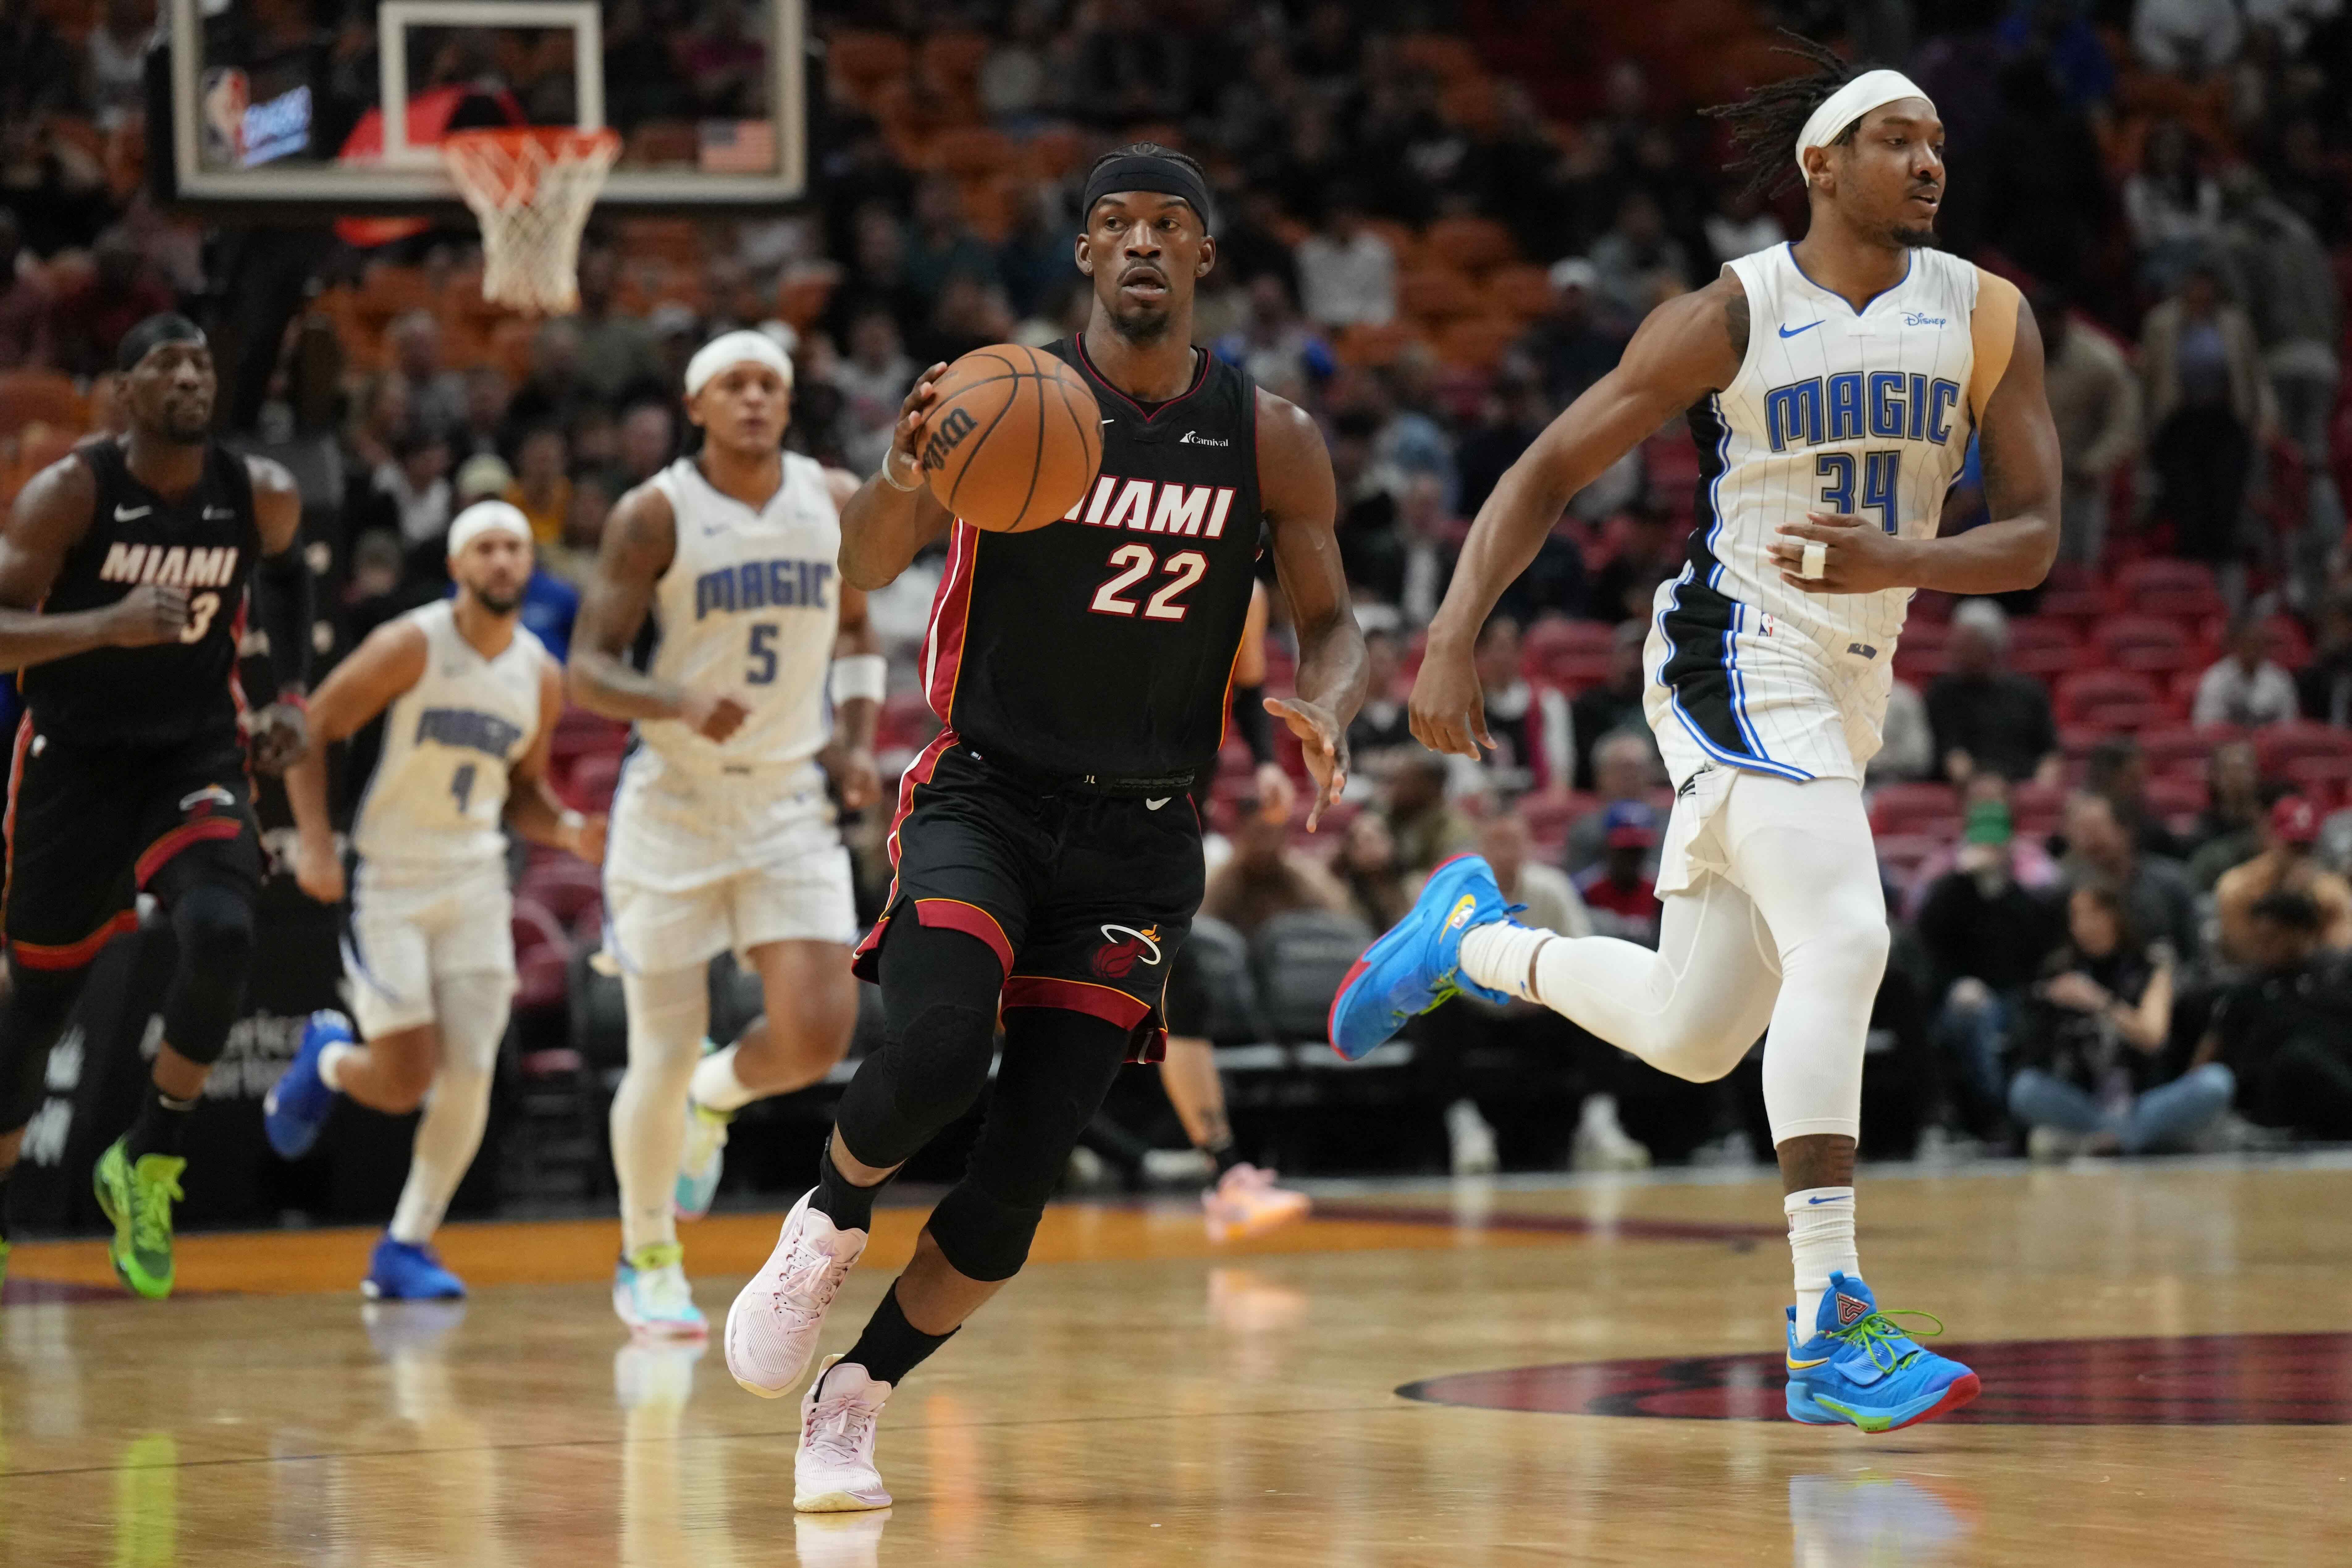 Miami Heat are on a comeback run like few others in this year's